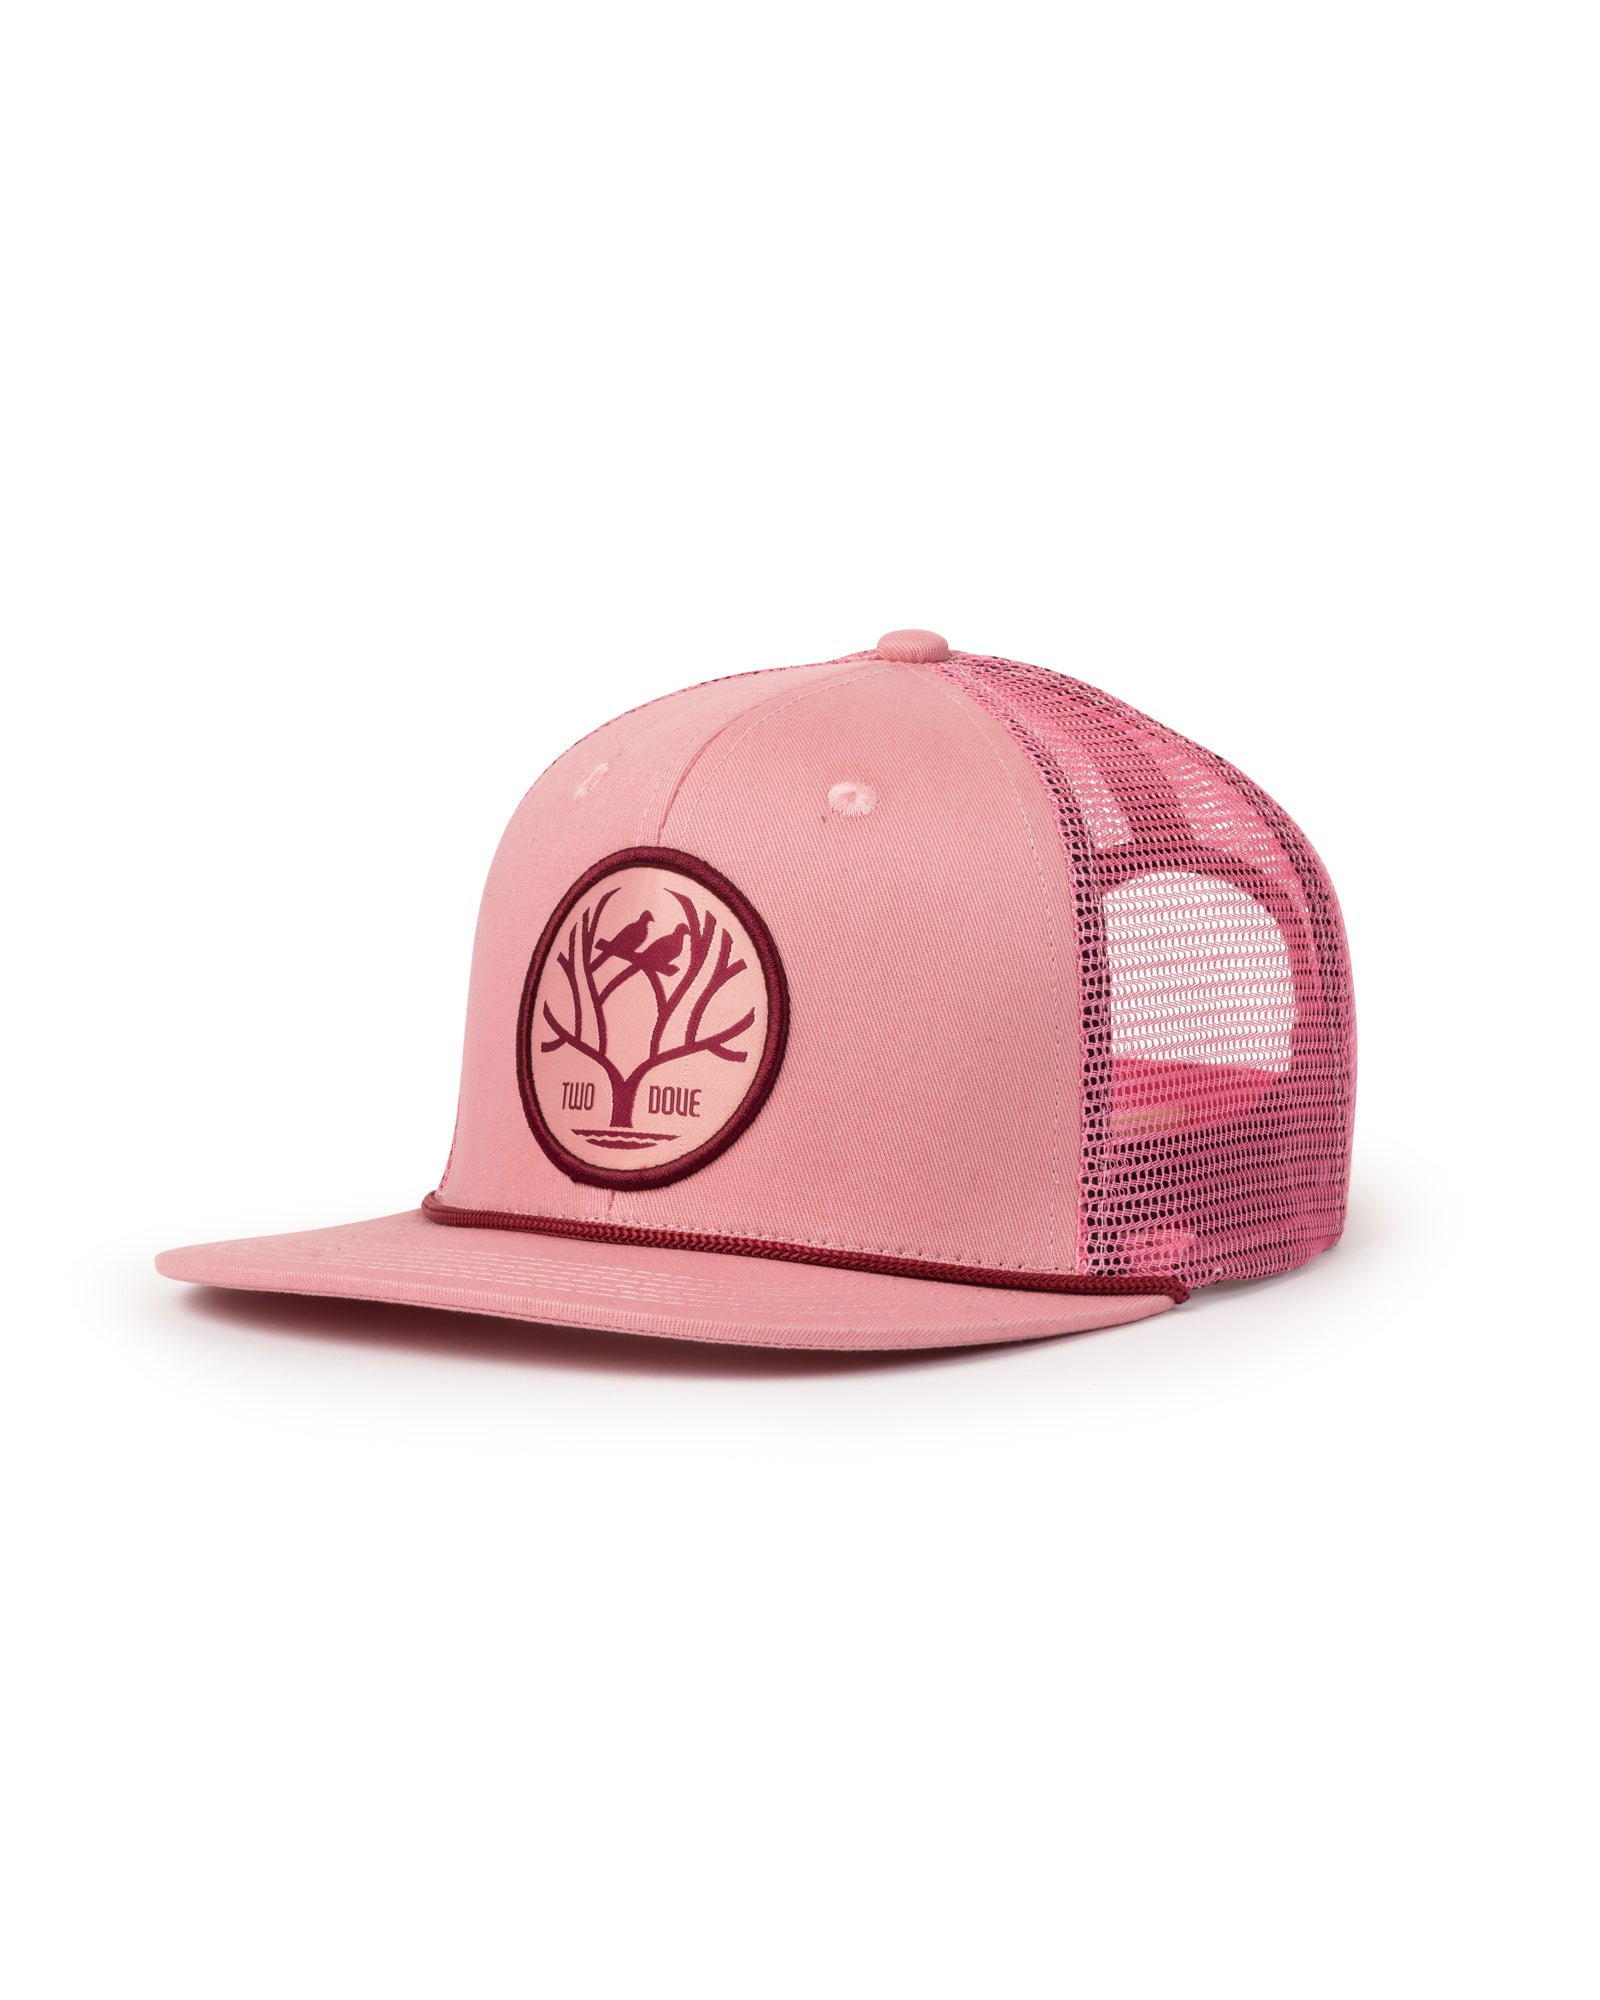 "Outdoor Life" - 6 Panel Pink